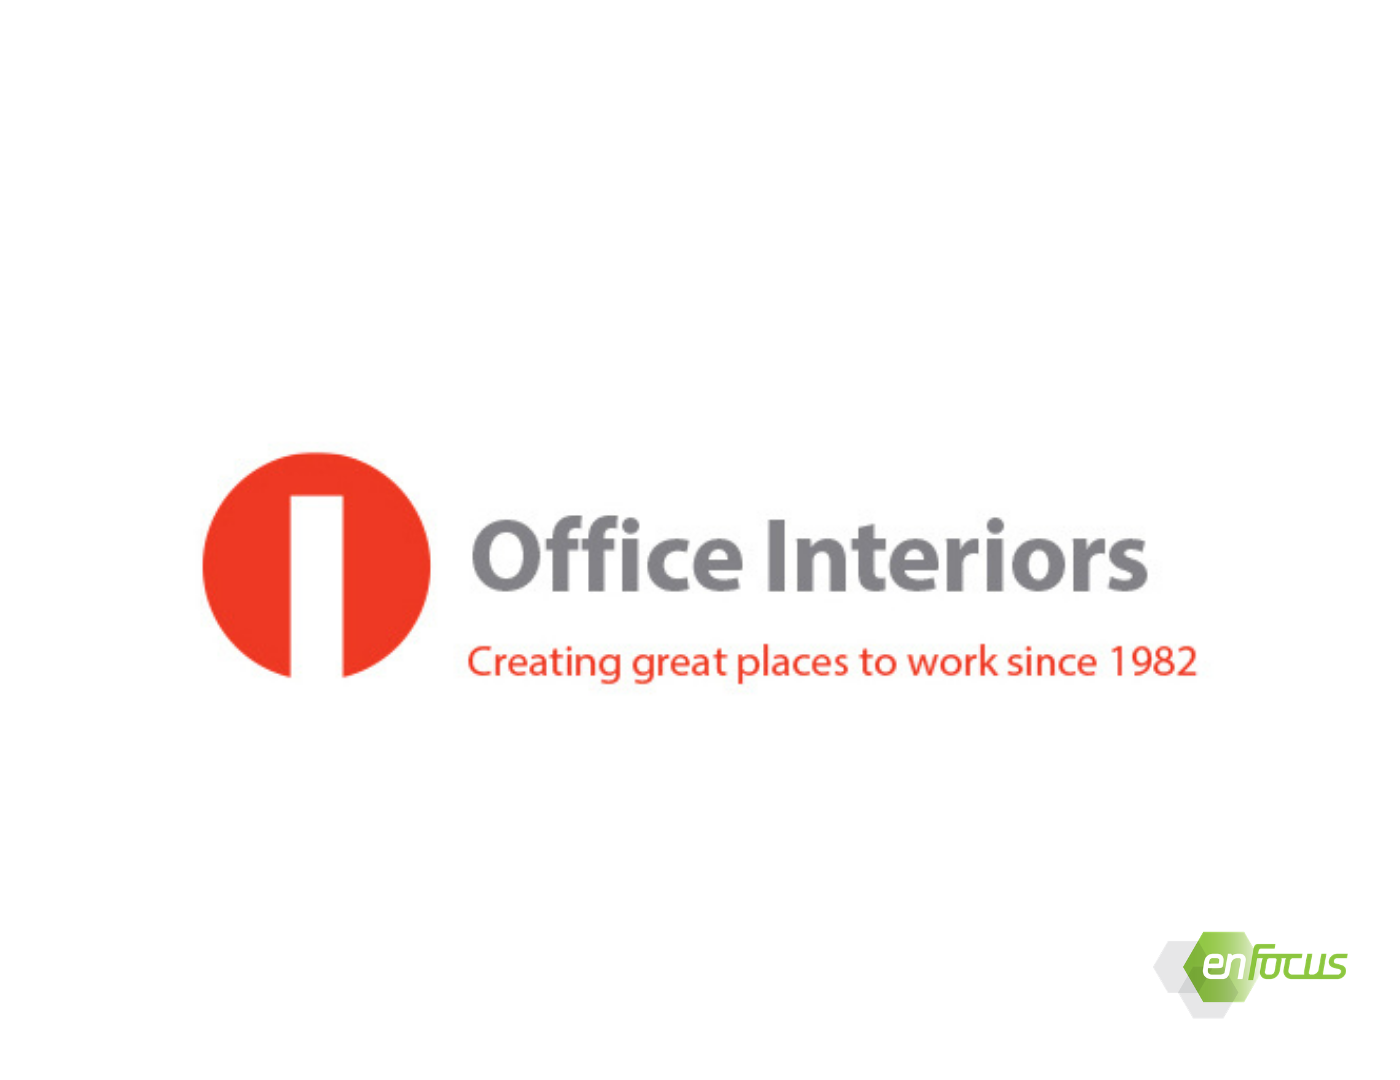 Office Interiors Leverages enFocus Team for Research and Grant Development